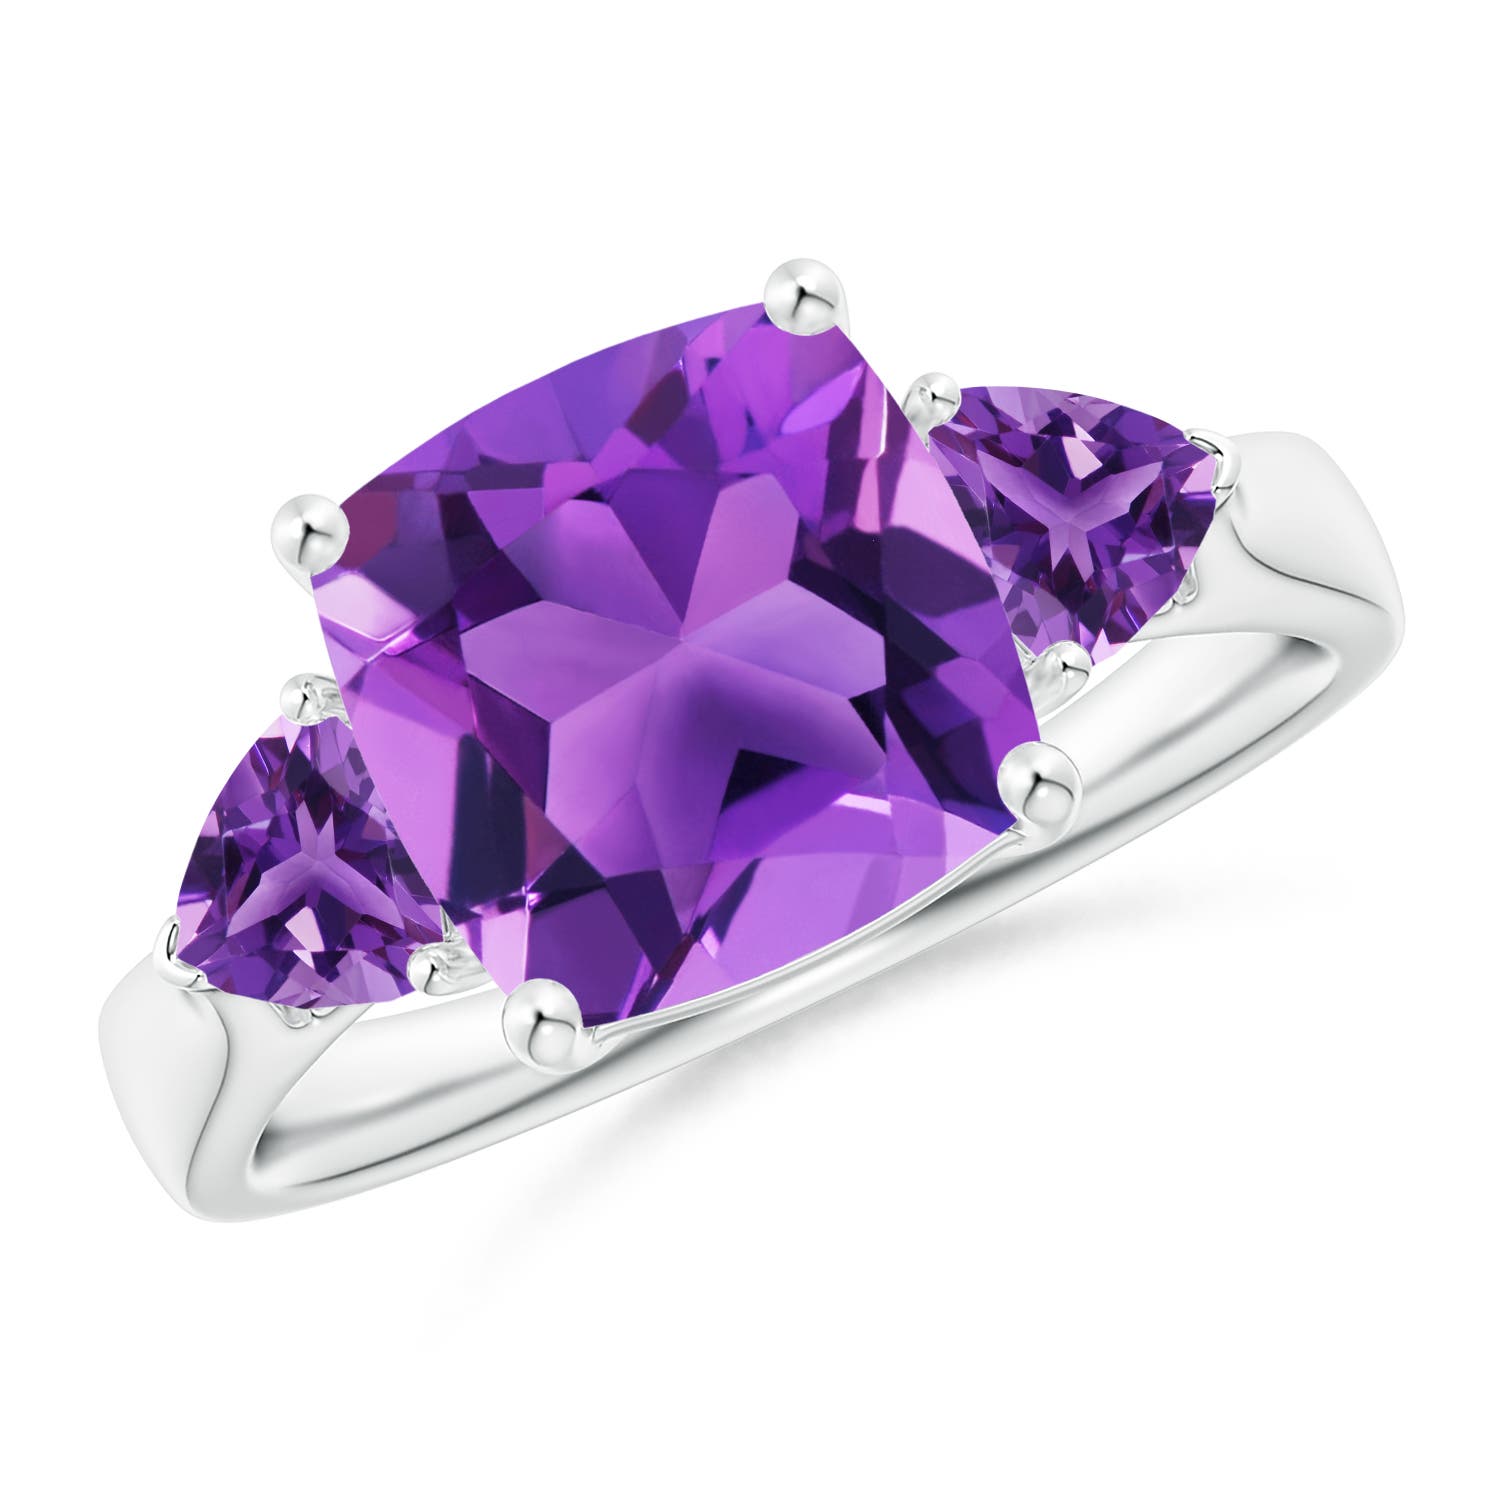 AAA - Amethyst / 3.9 CT / 14 KT White Gold